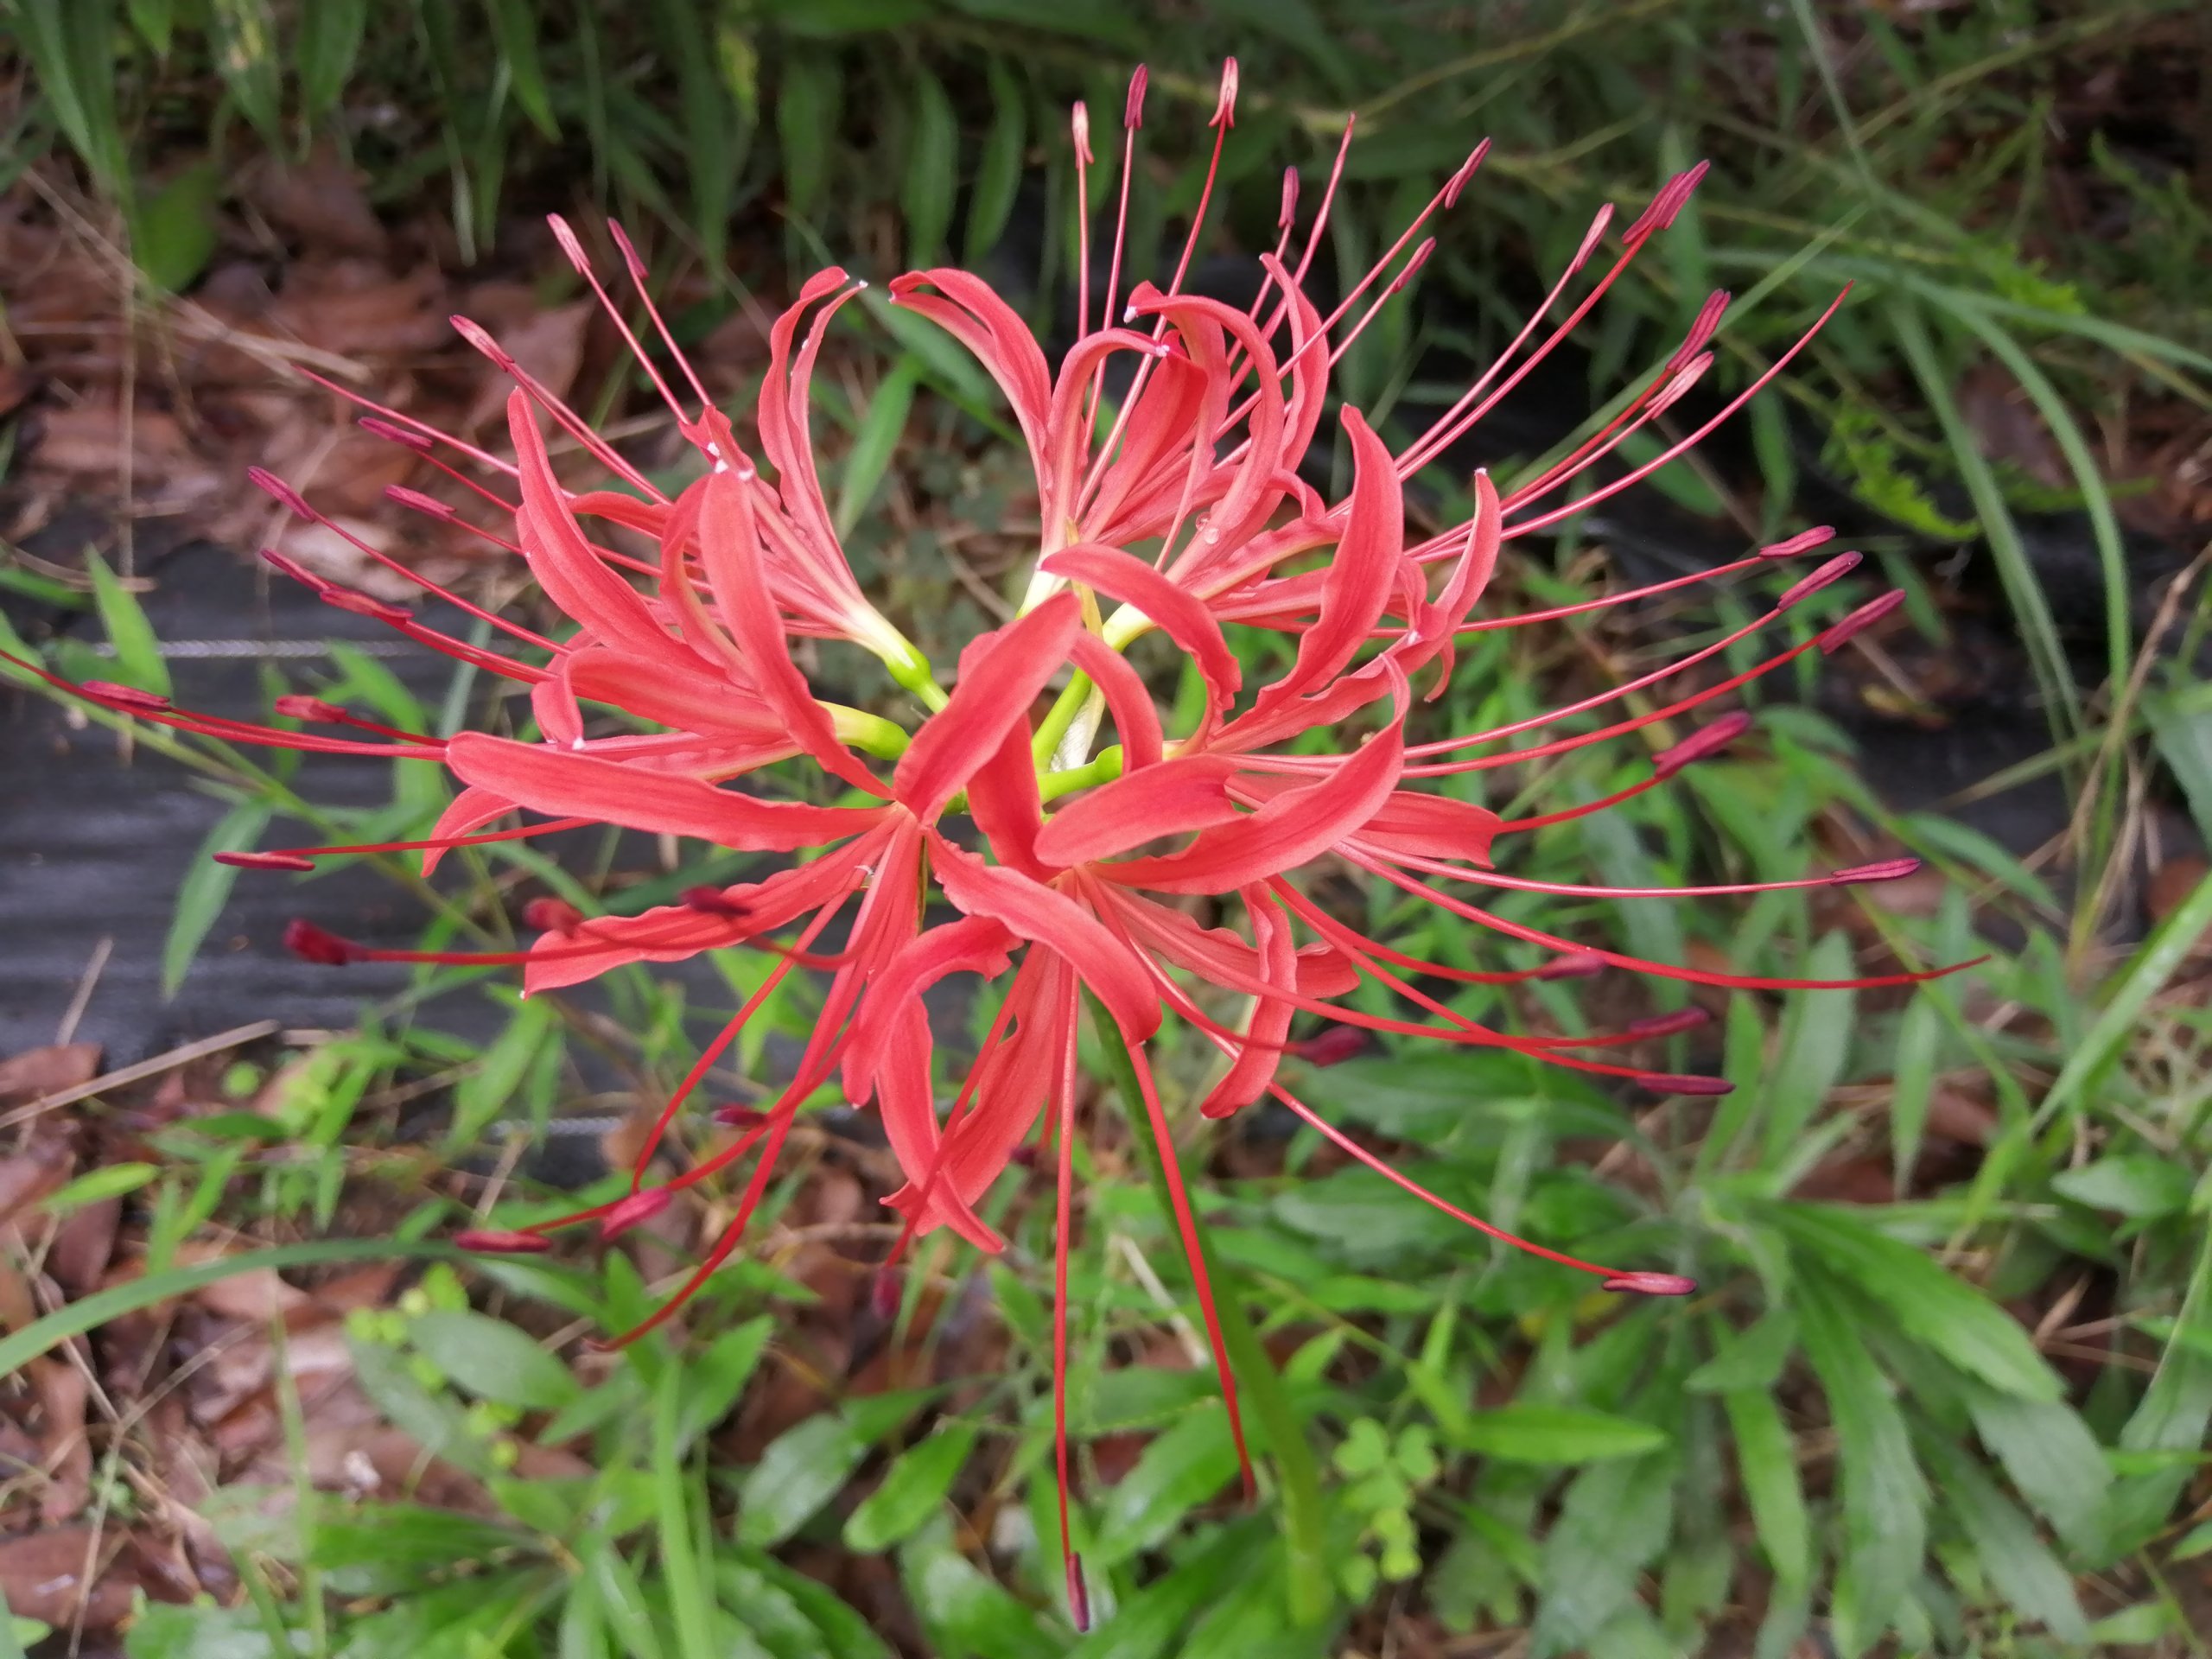 Red spider lilly.